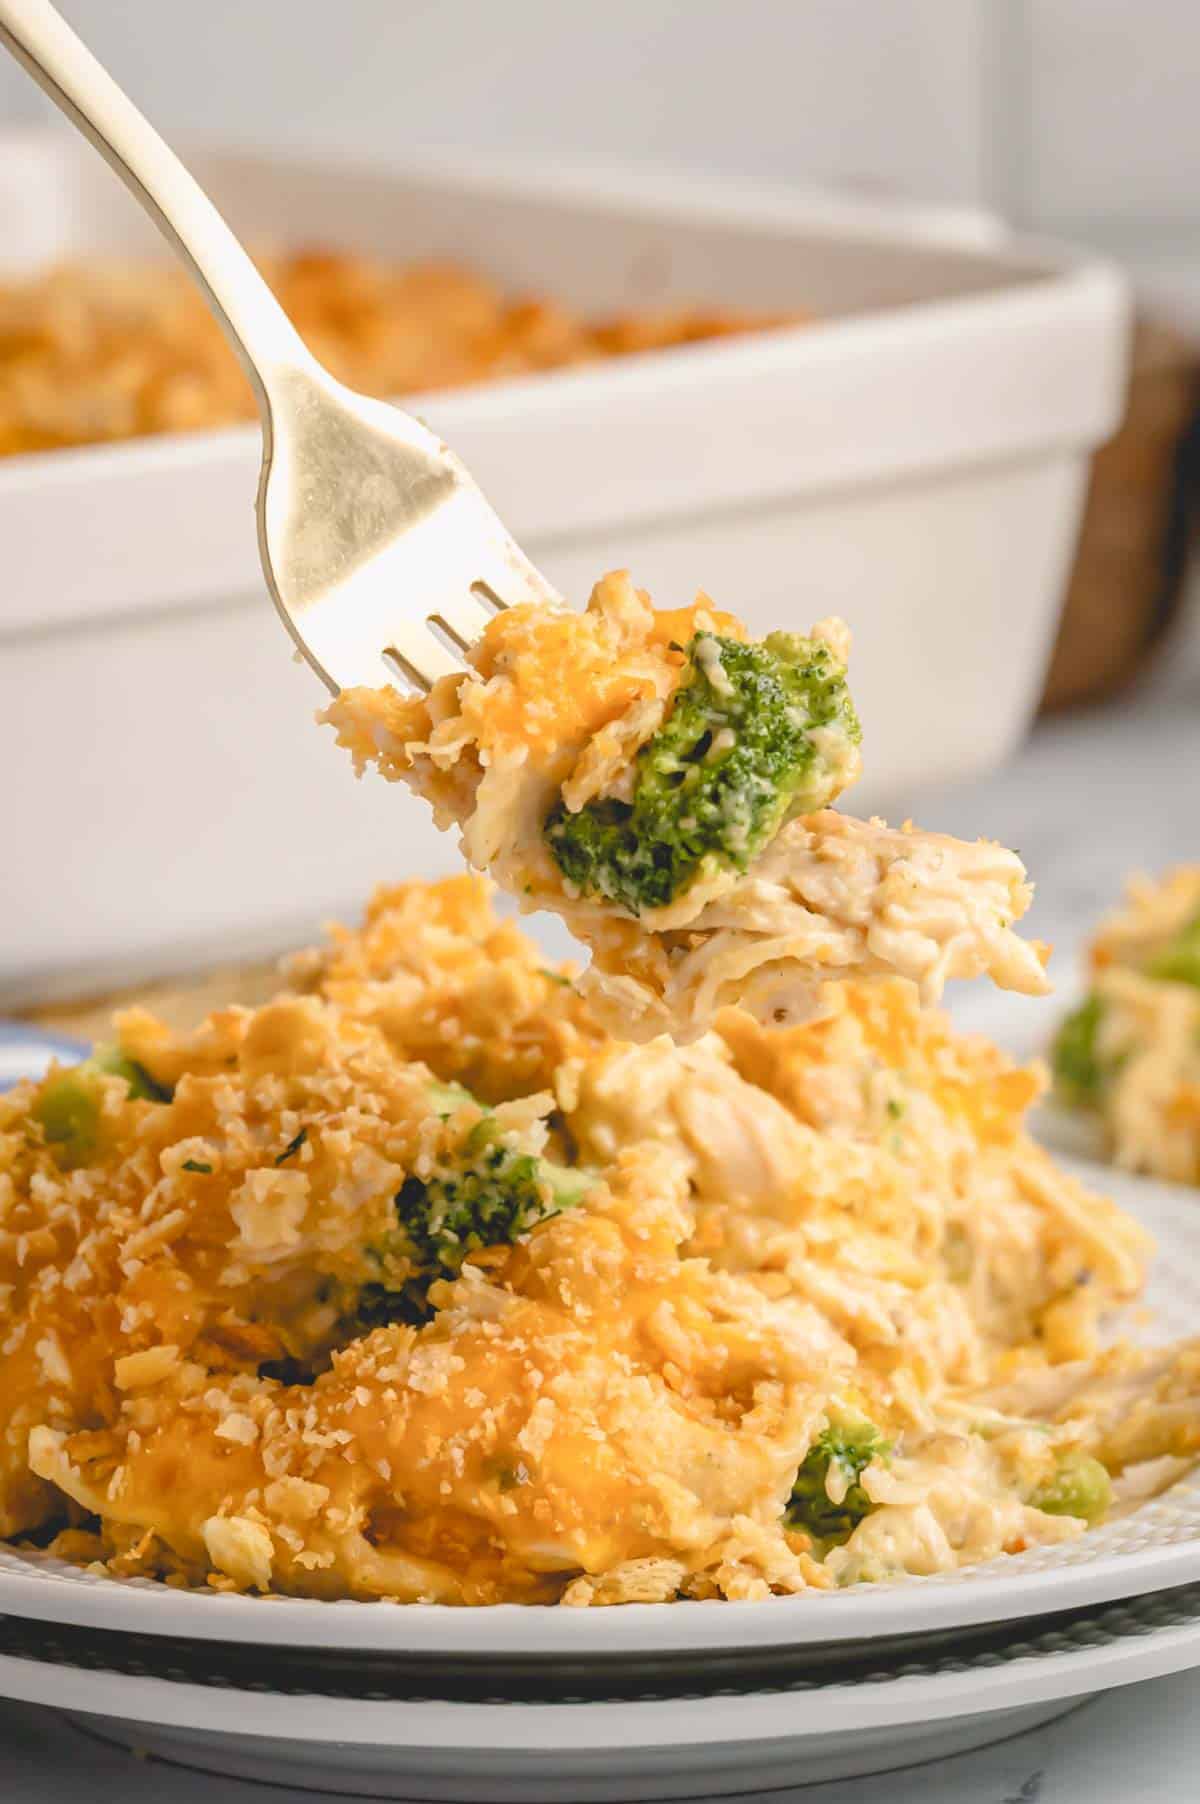 A fork holding a bite of chicken and broccoli casserole over a serving on a plate.